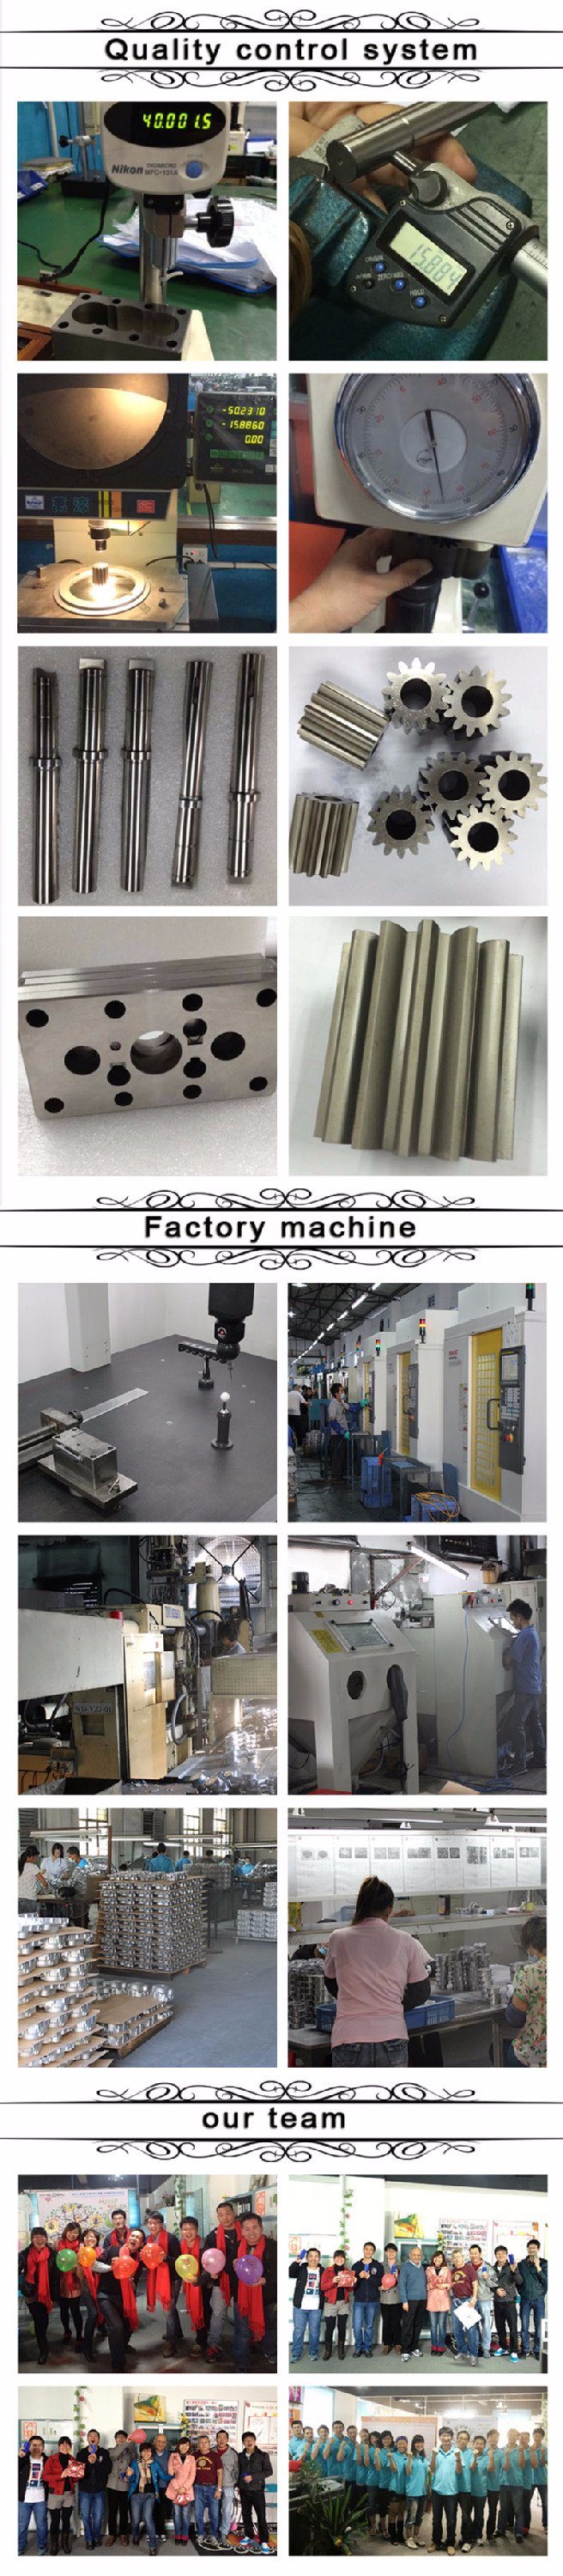 Experienced China Custom CNC Machining, CNC Turning, CNC Milling Part Service with C45e Material